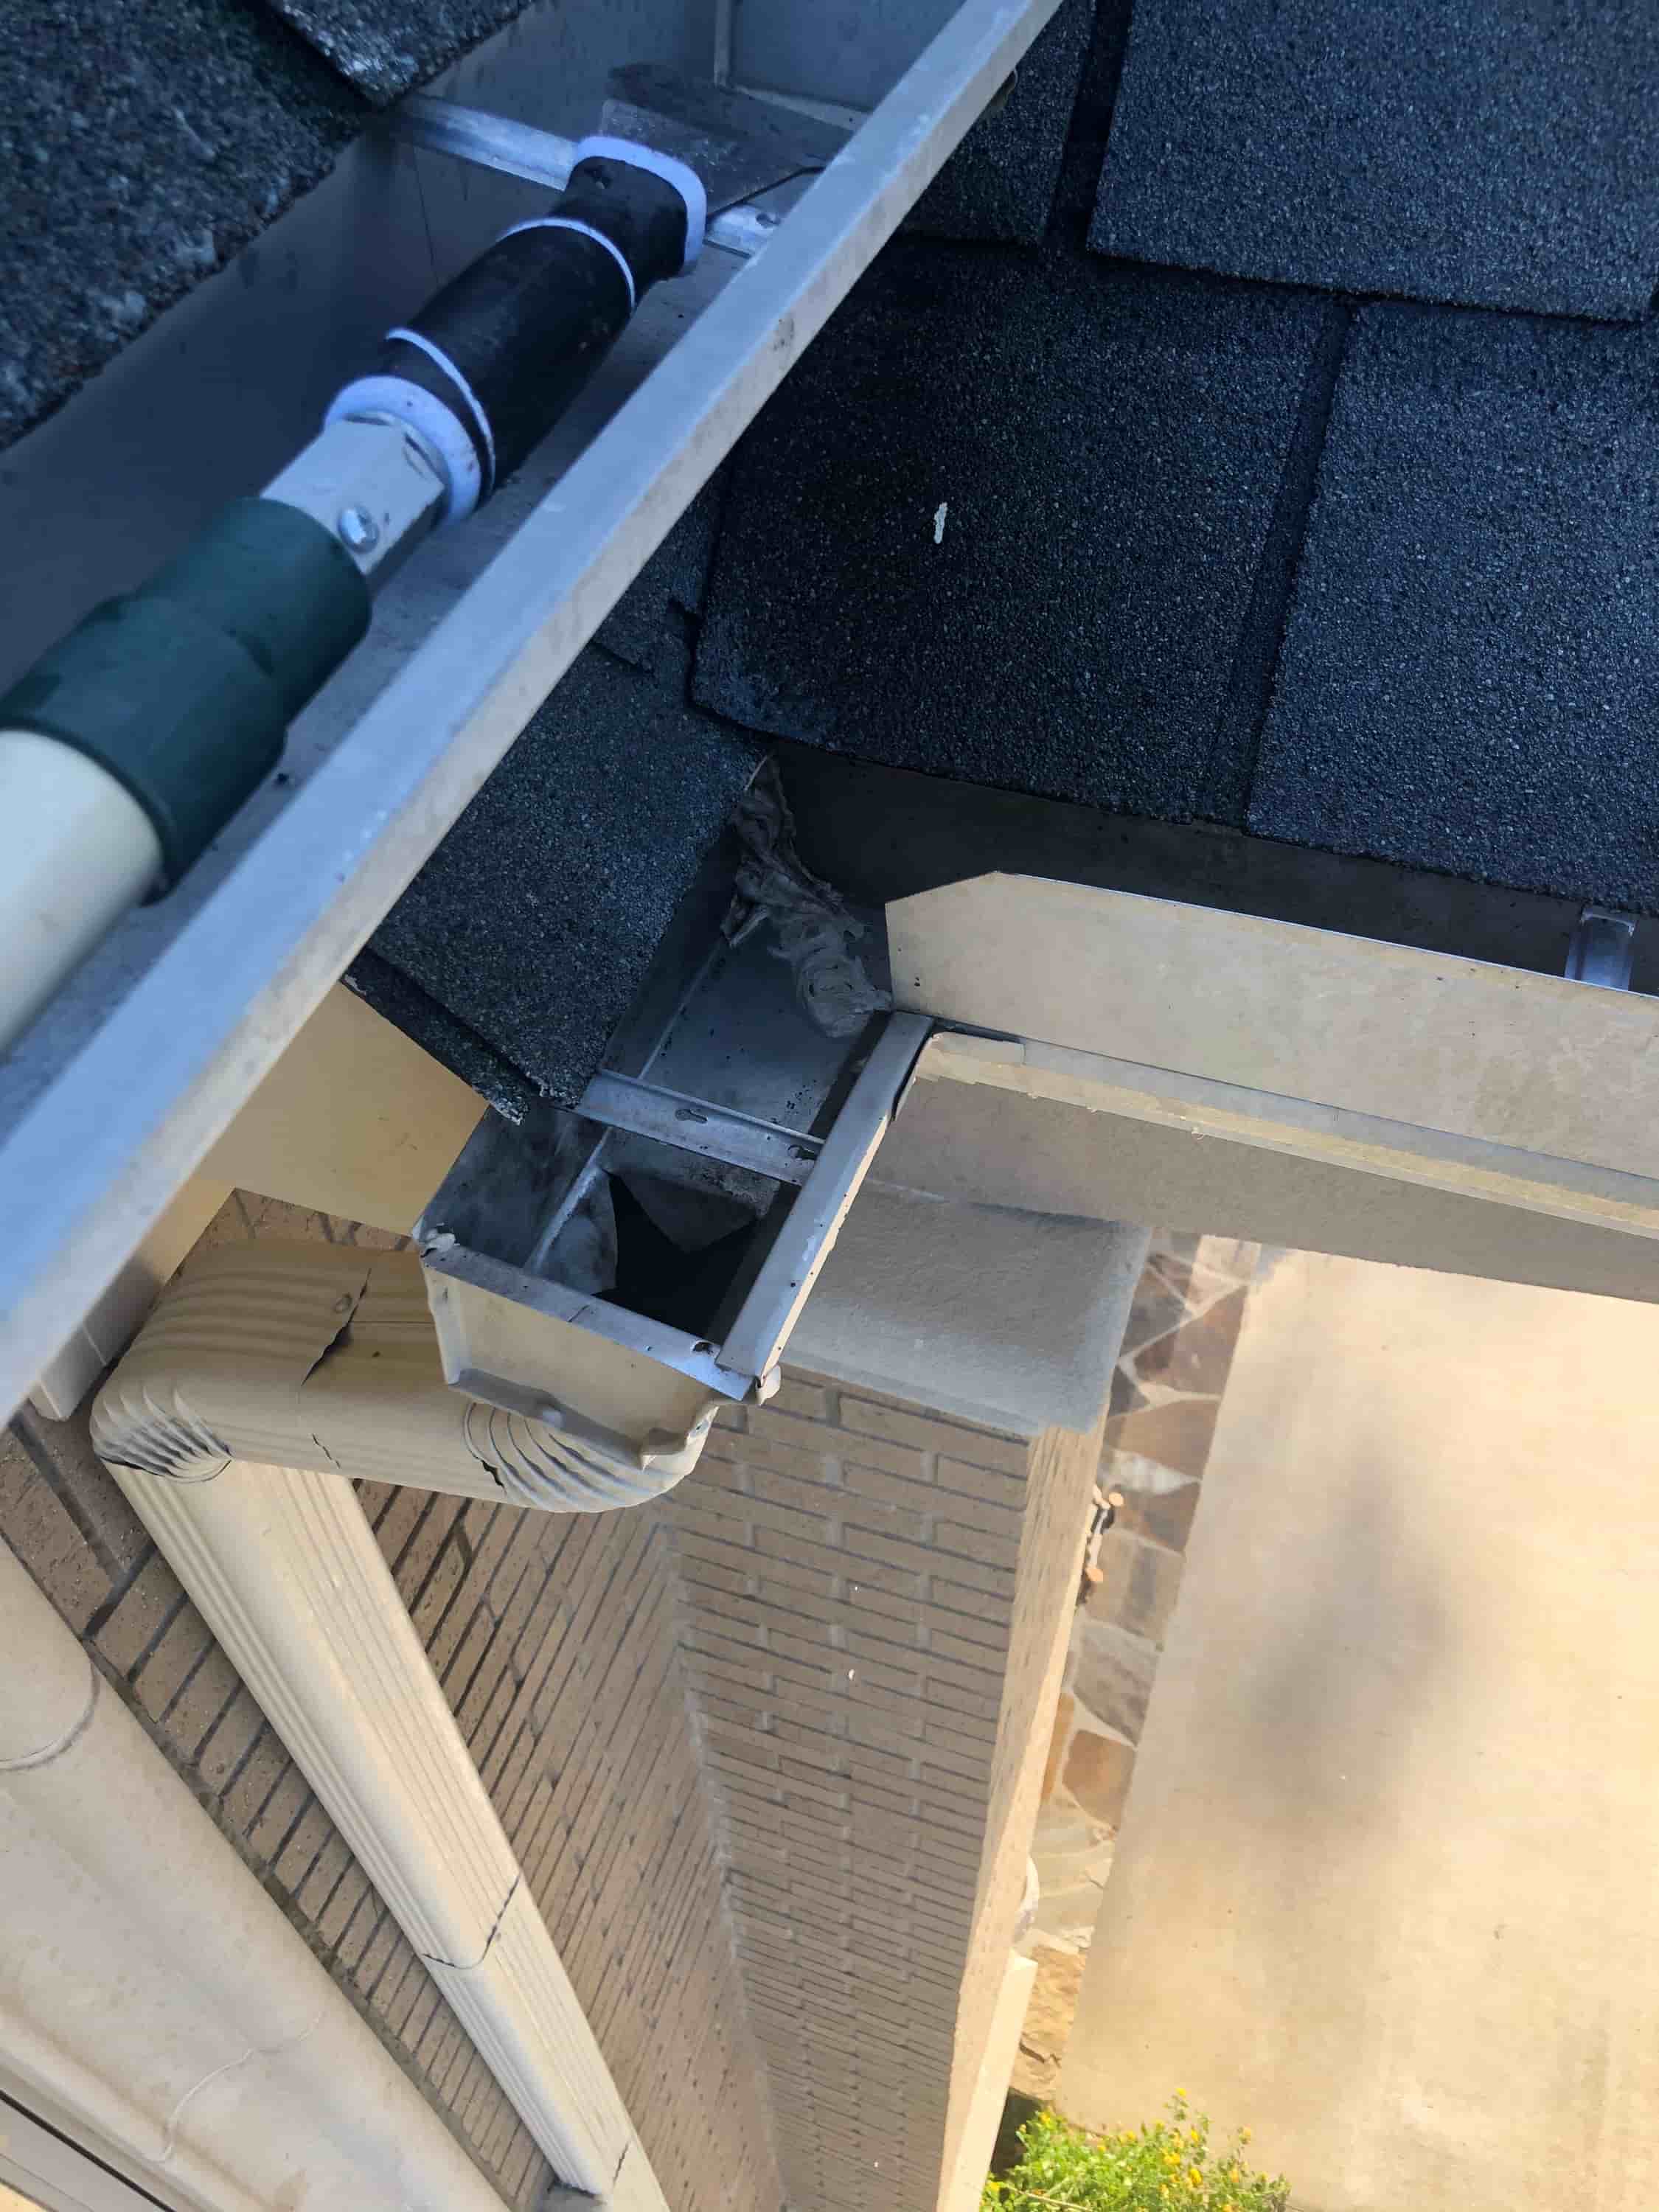 device for cleaning gutters